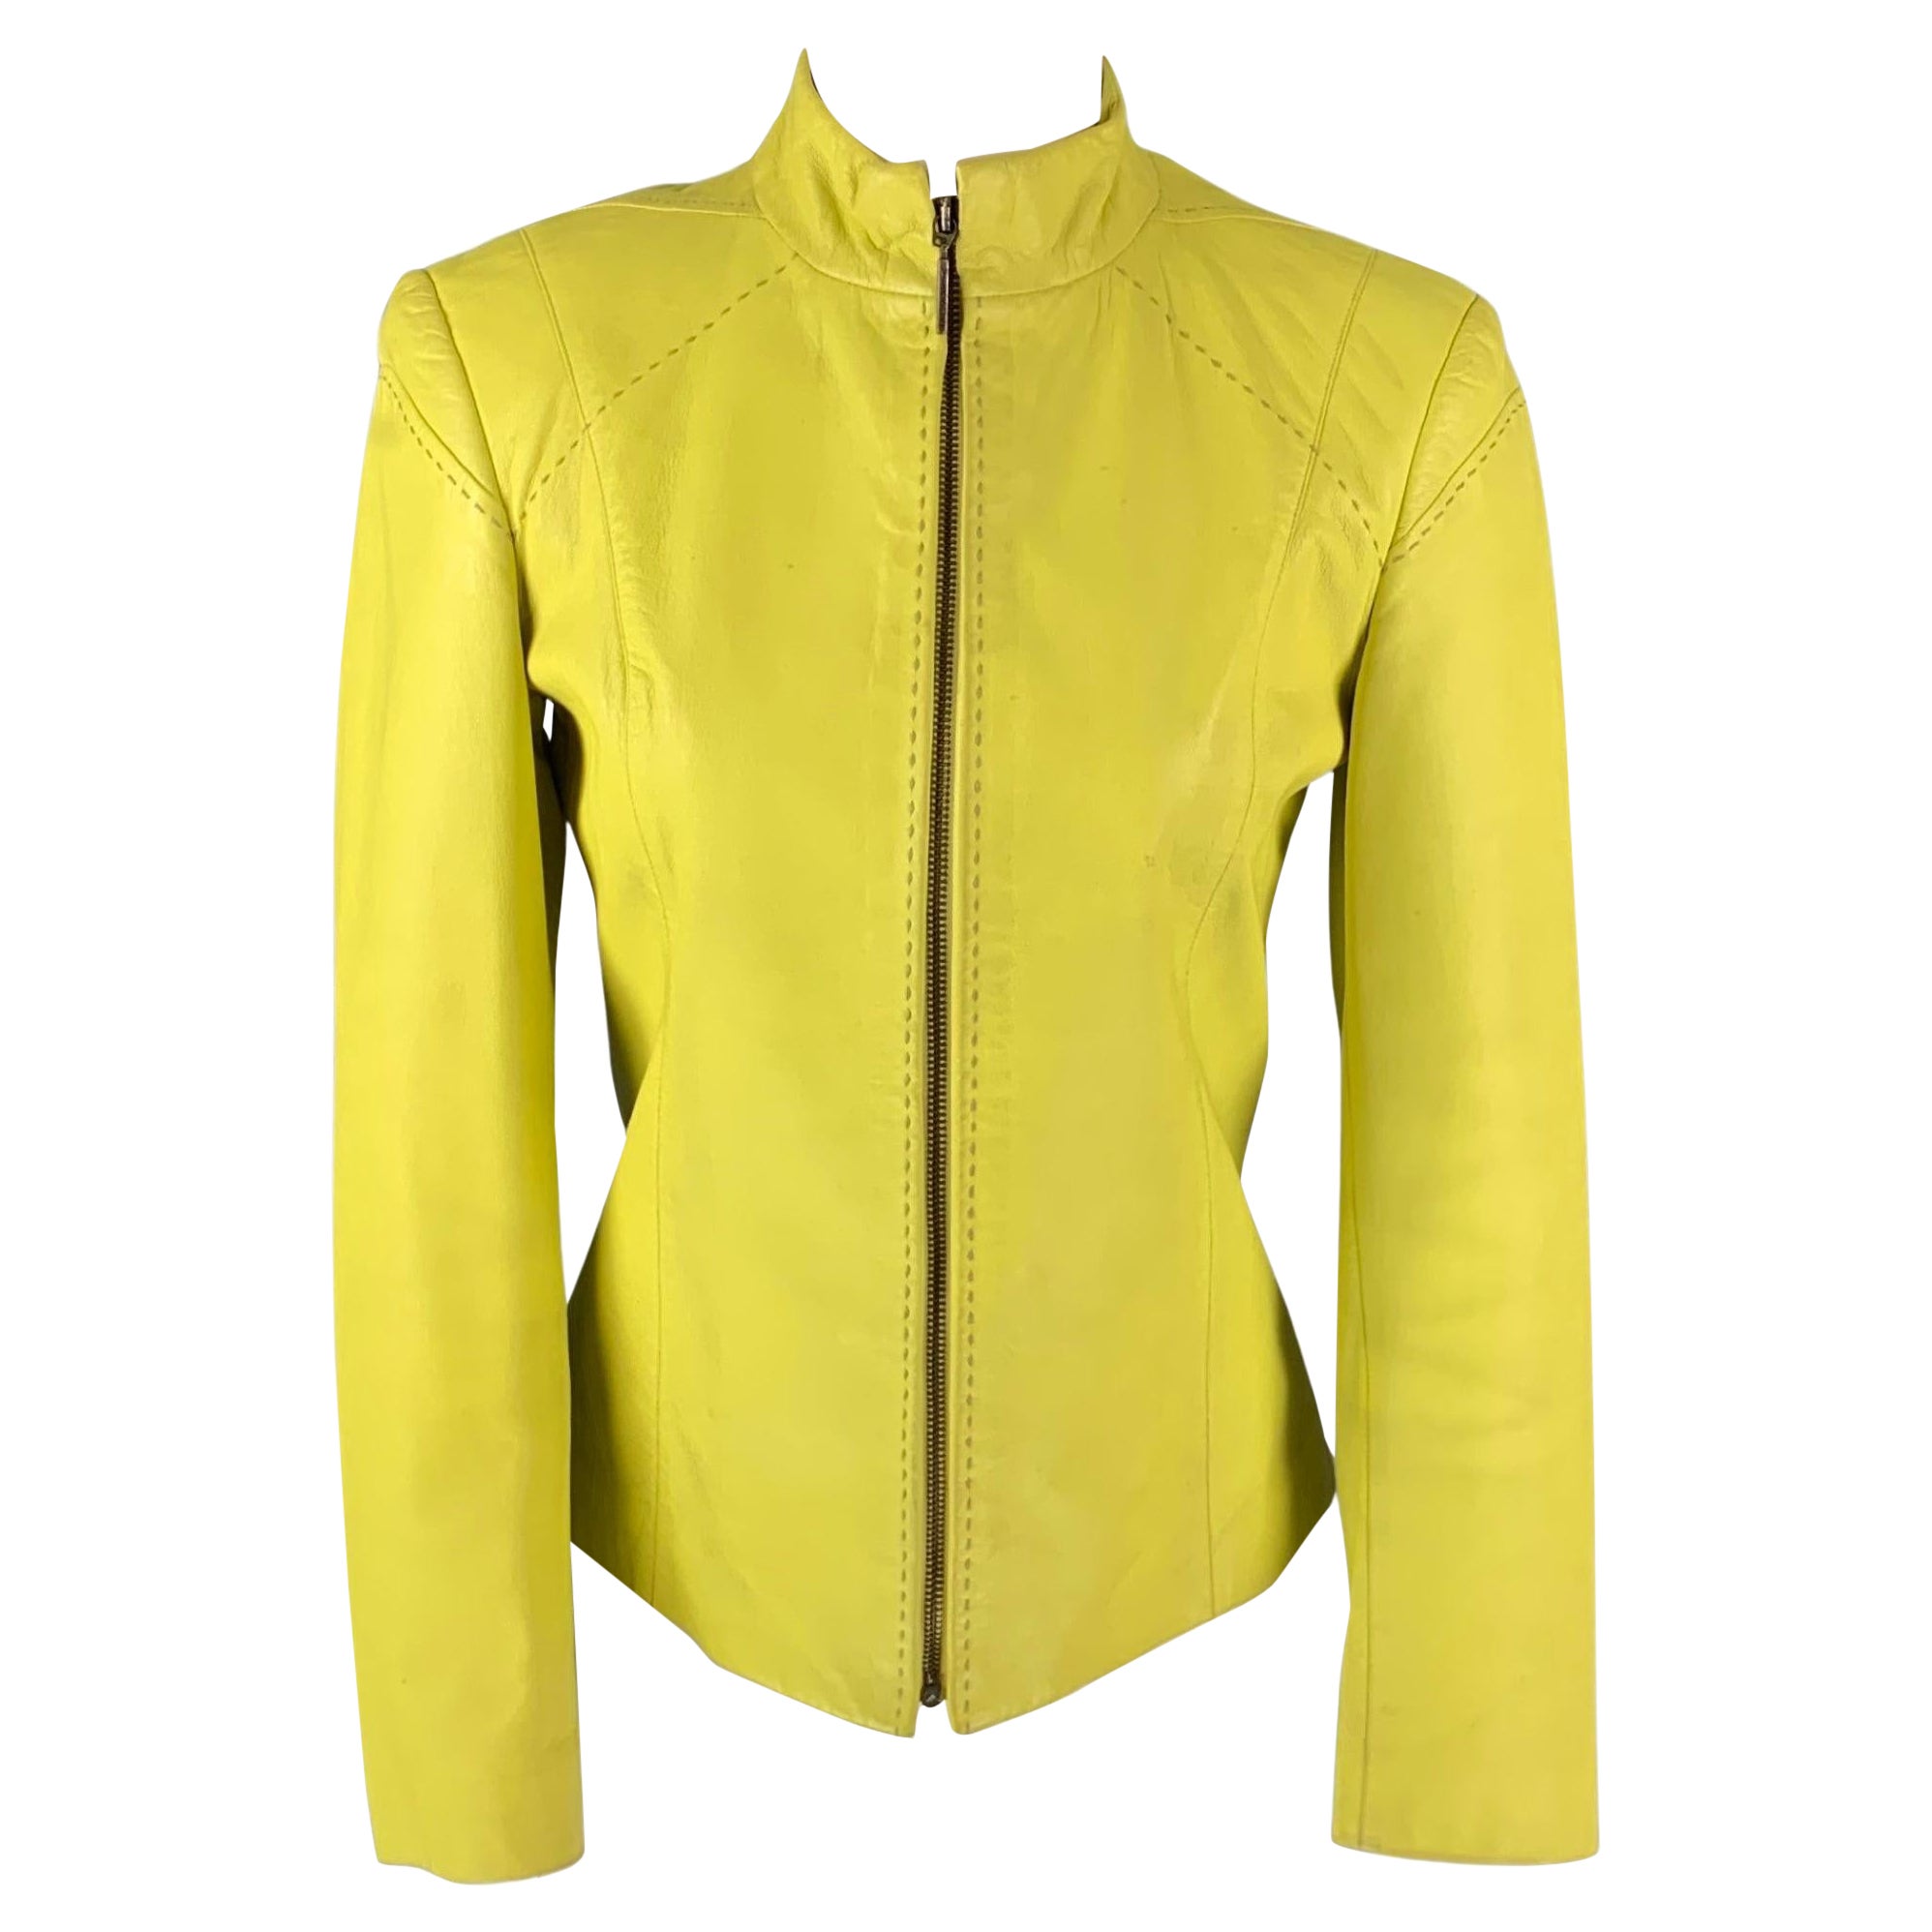 Vintage VERSUS by GIANNI VERSACE Size 4 Yellow Leather Jacket